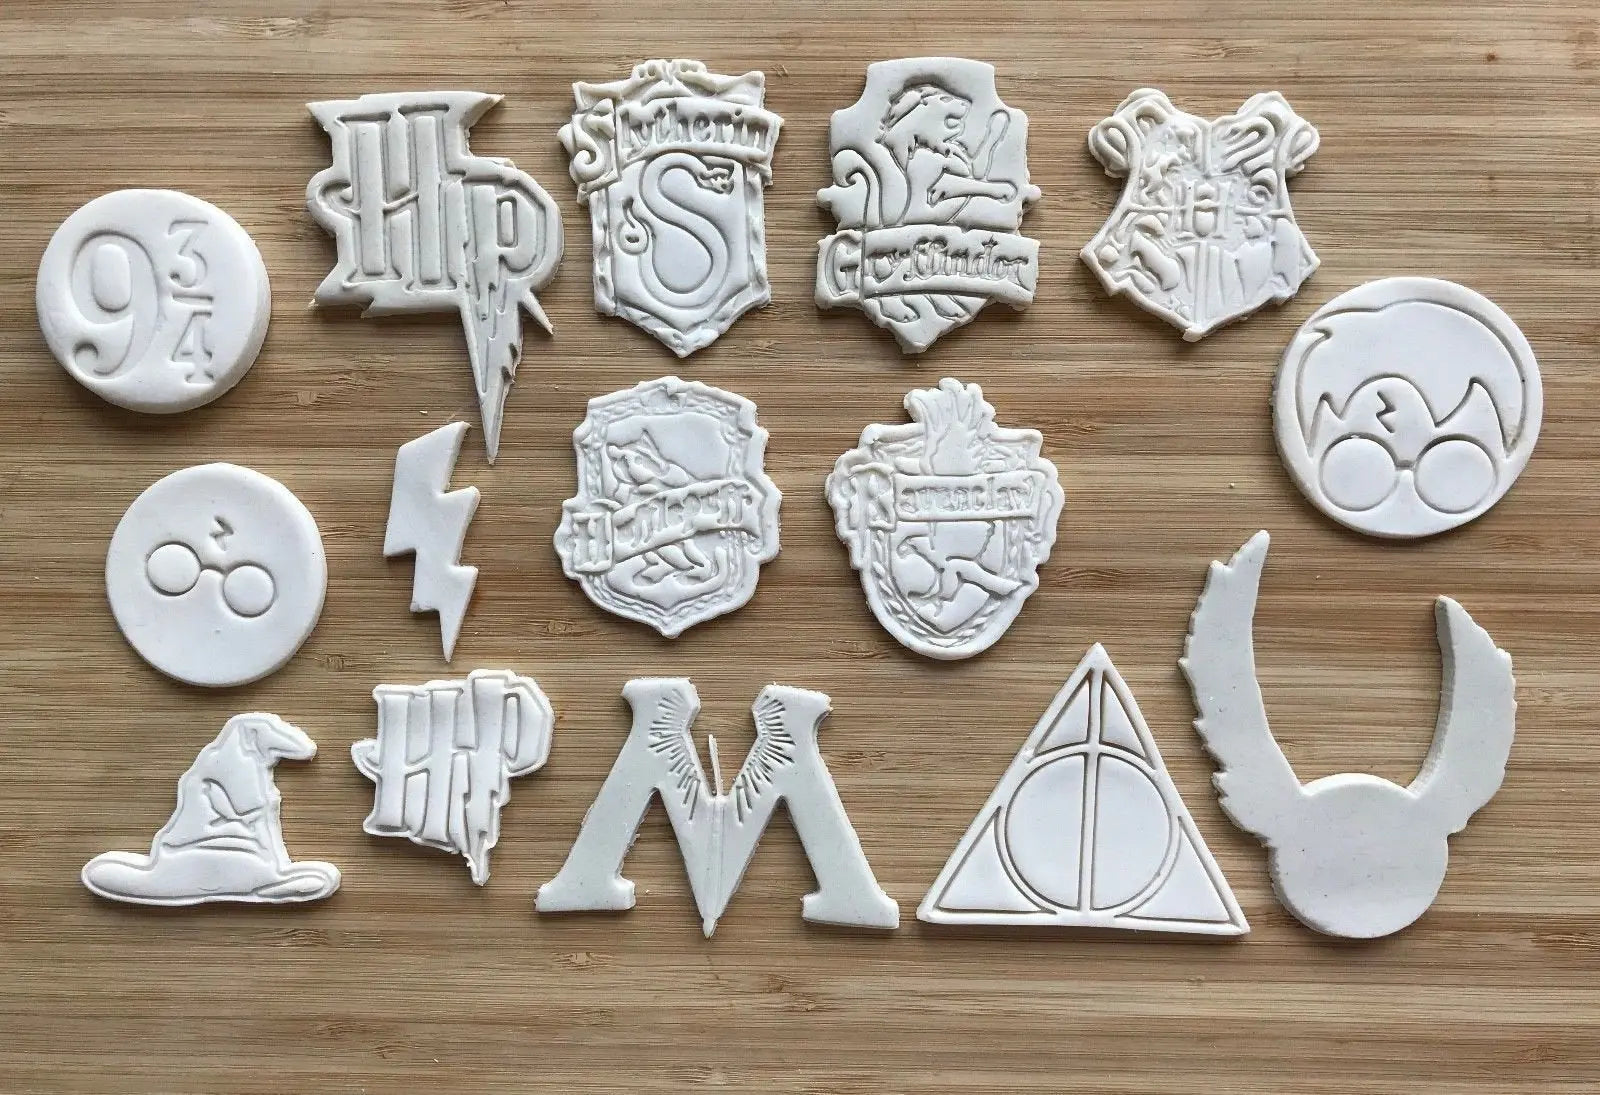 Harry Potter Cookie Cutter - Cheap Cookie Cutters